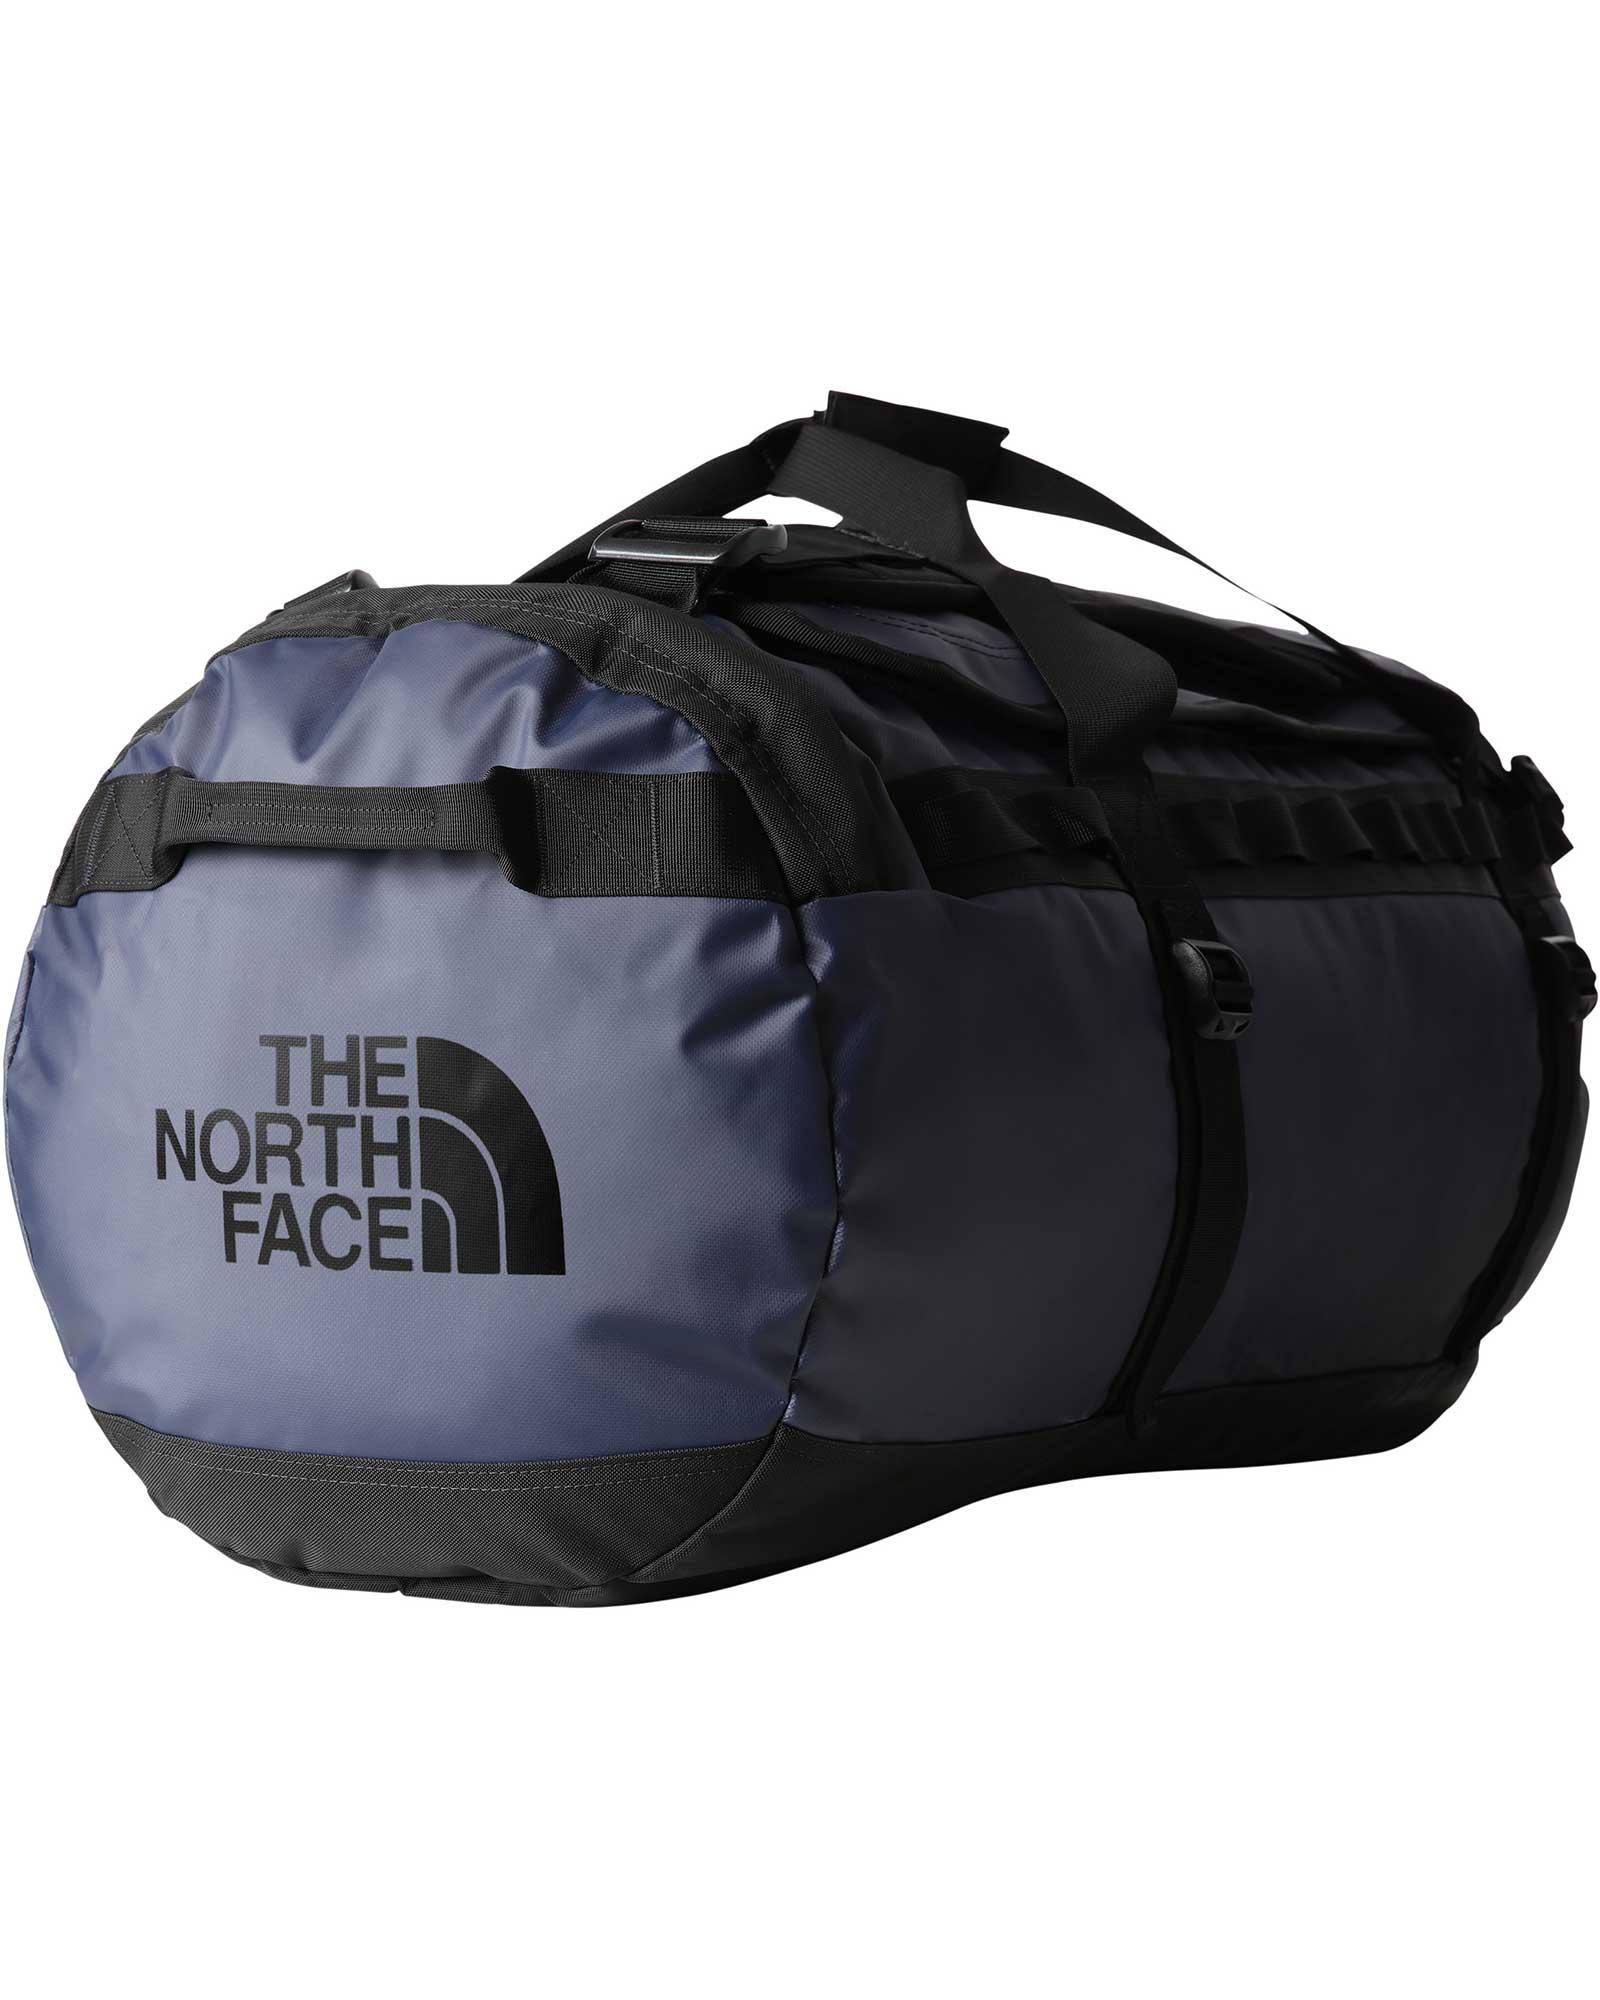 The North Face Base Camp Duffel Large 95l